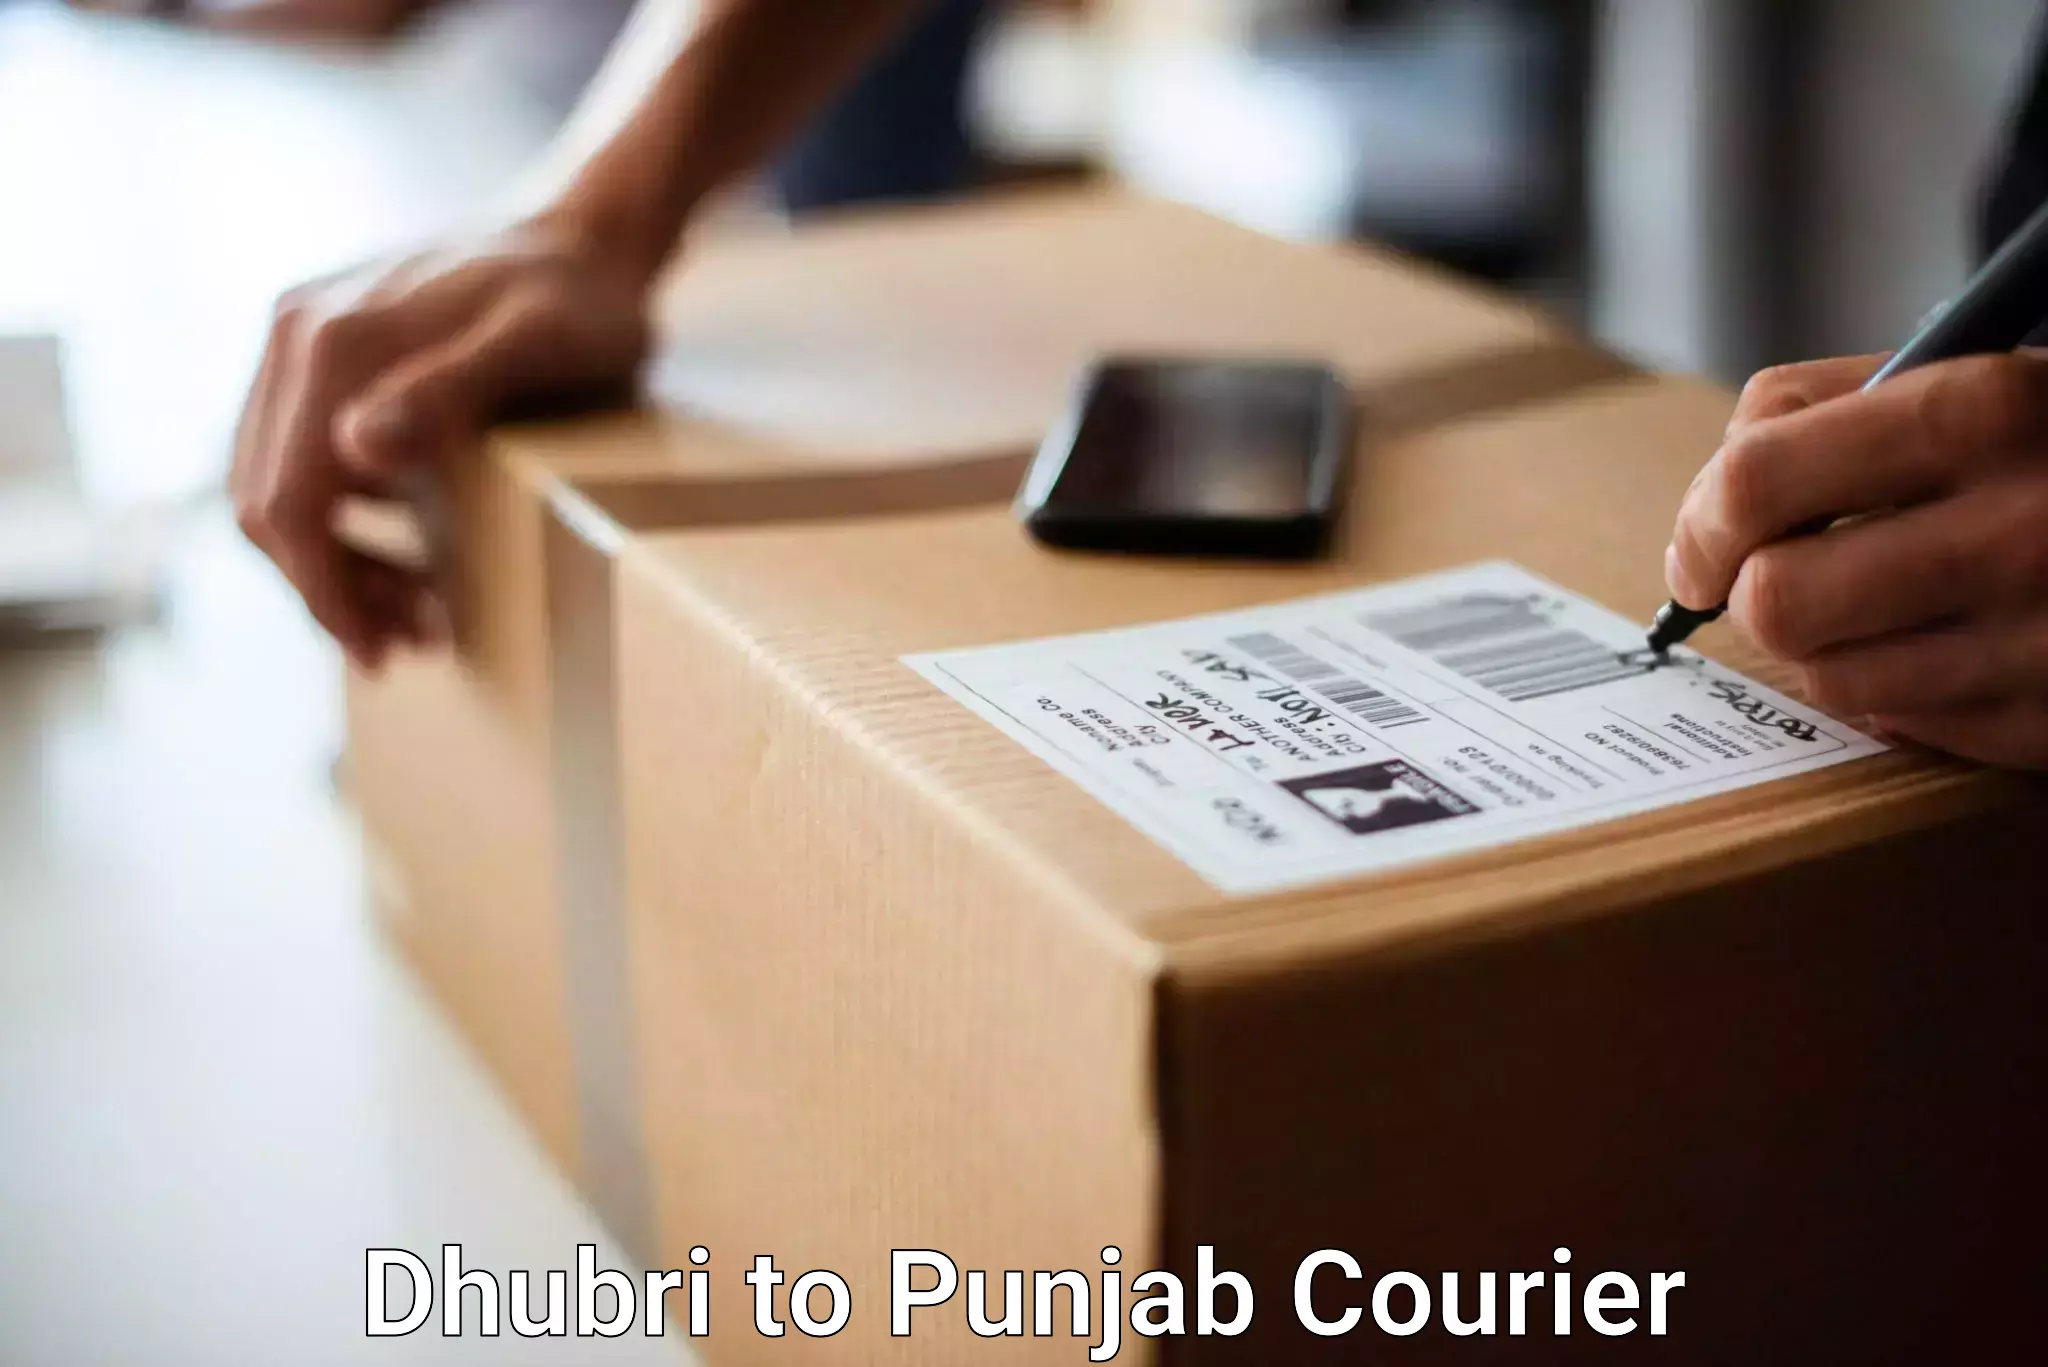 Baggage delivery scheduling in Dhubri to Dinanagar